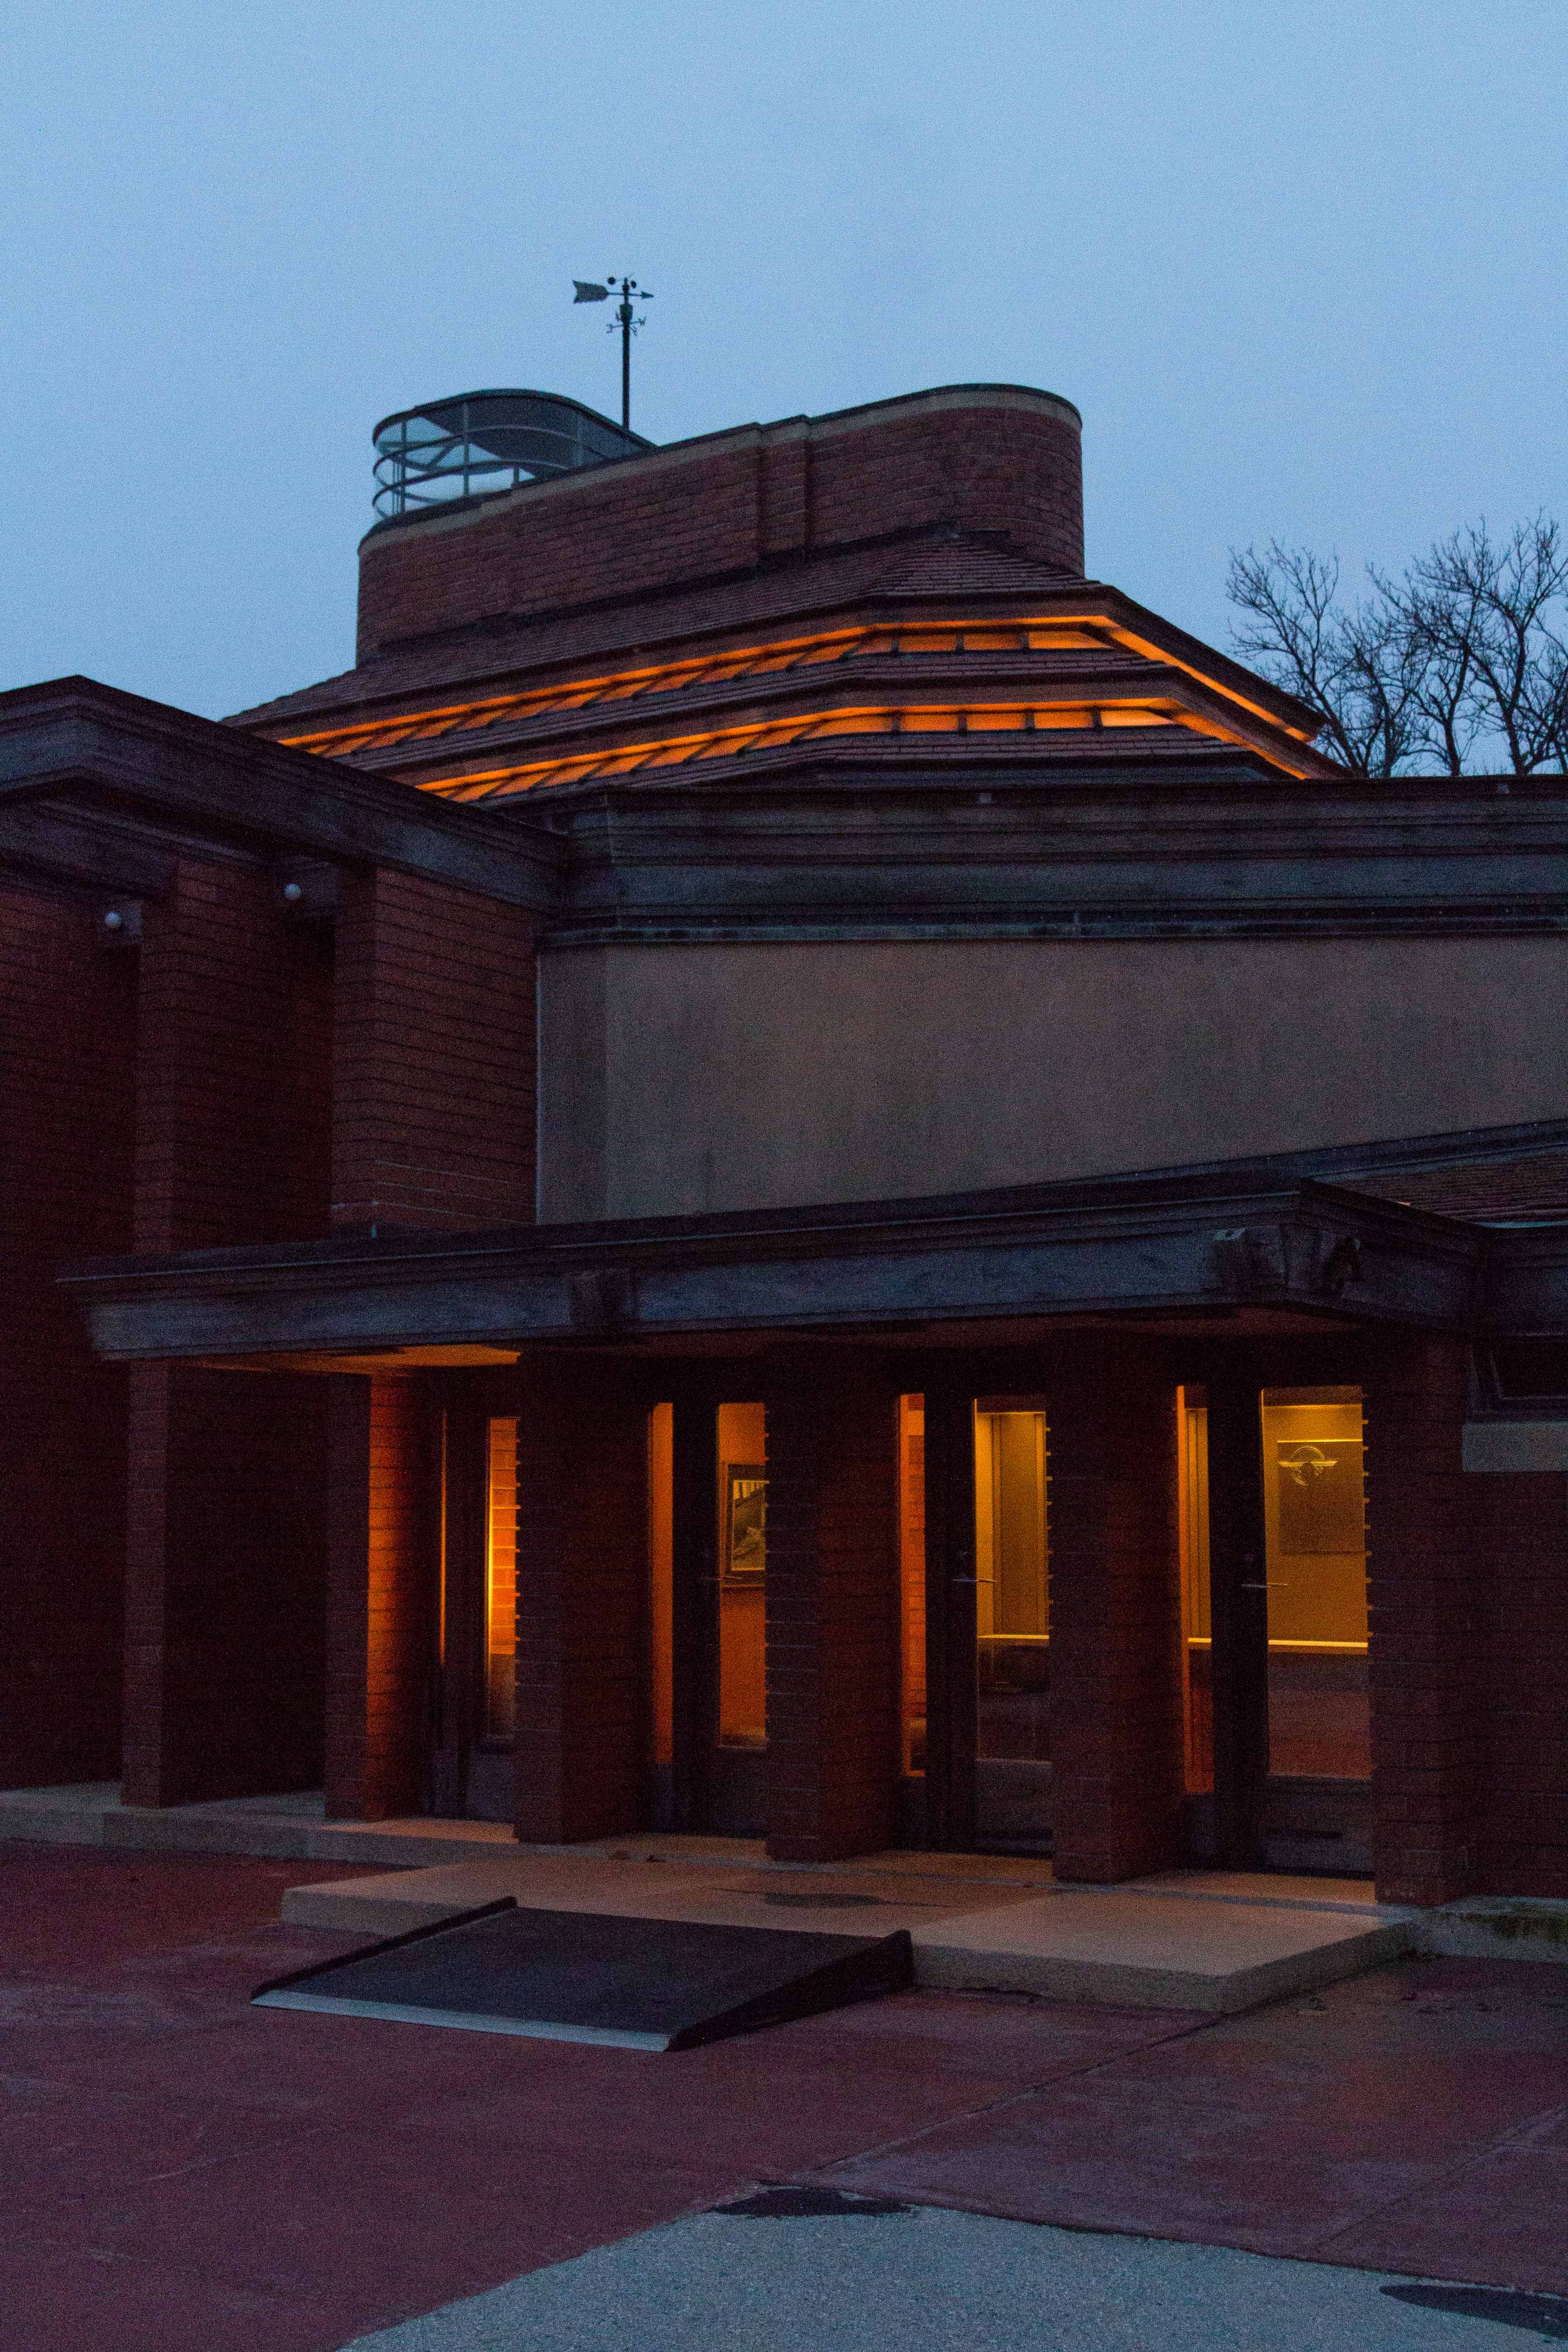 The Johnson Foundation at Wingspread in Racine, WI - Frank Lloyd Wright architecture | https://www.roseclearfield.com